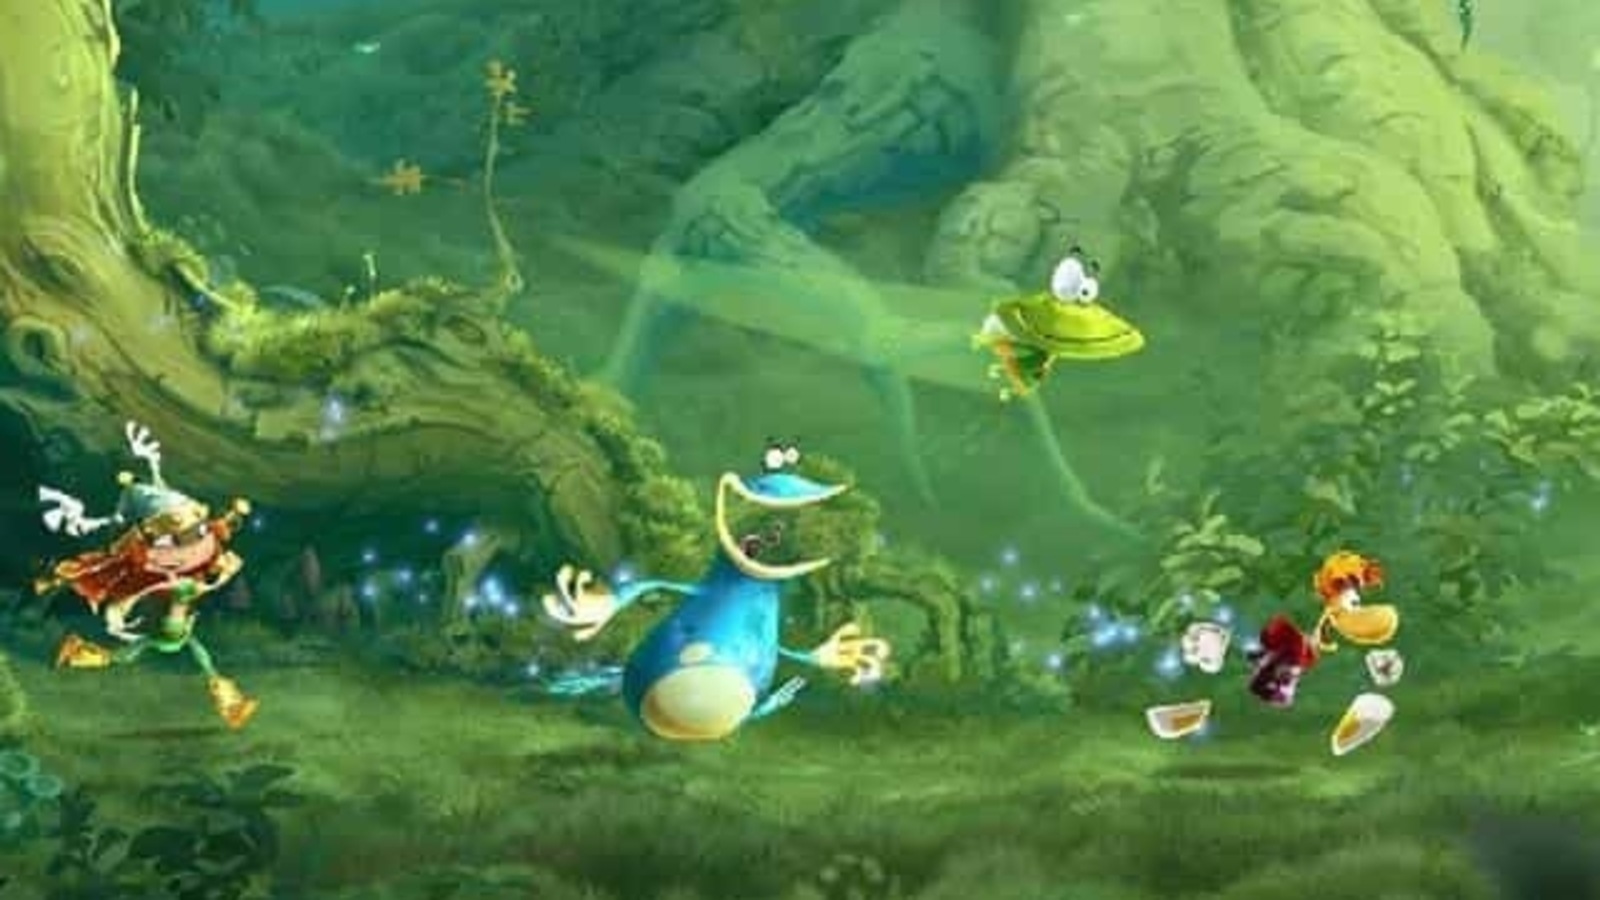 Rayman Legends is available for free on UPLAY until April 3rd